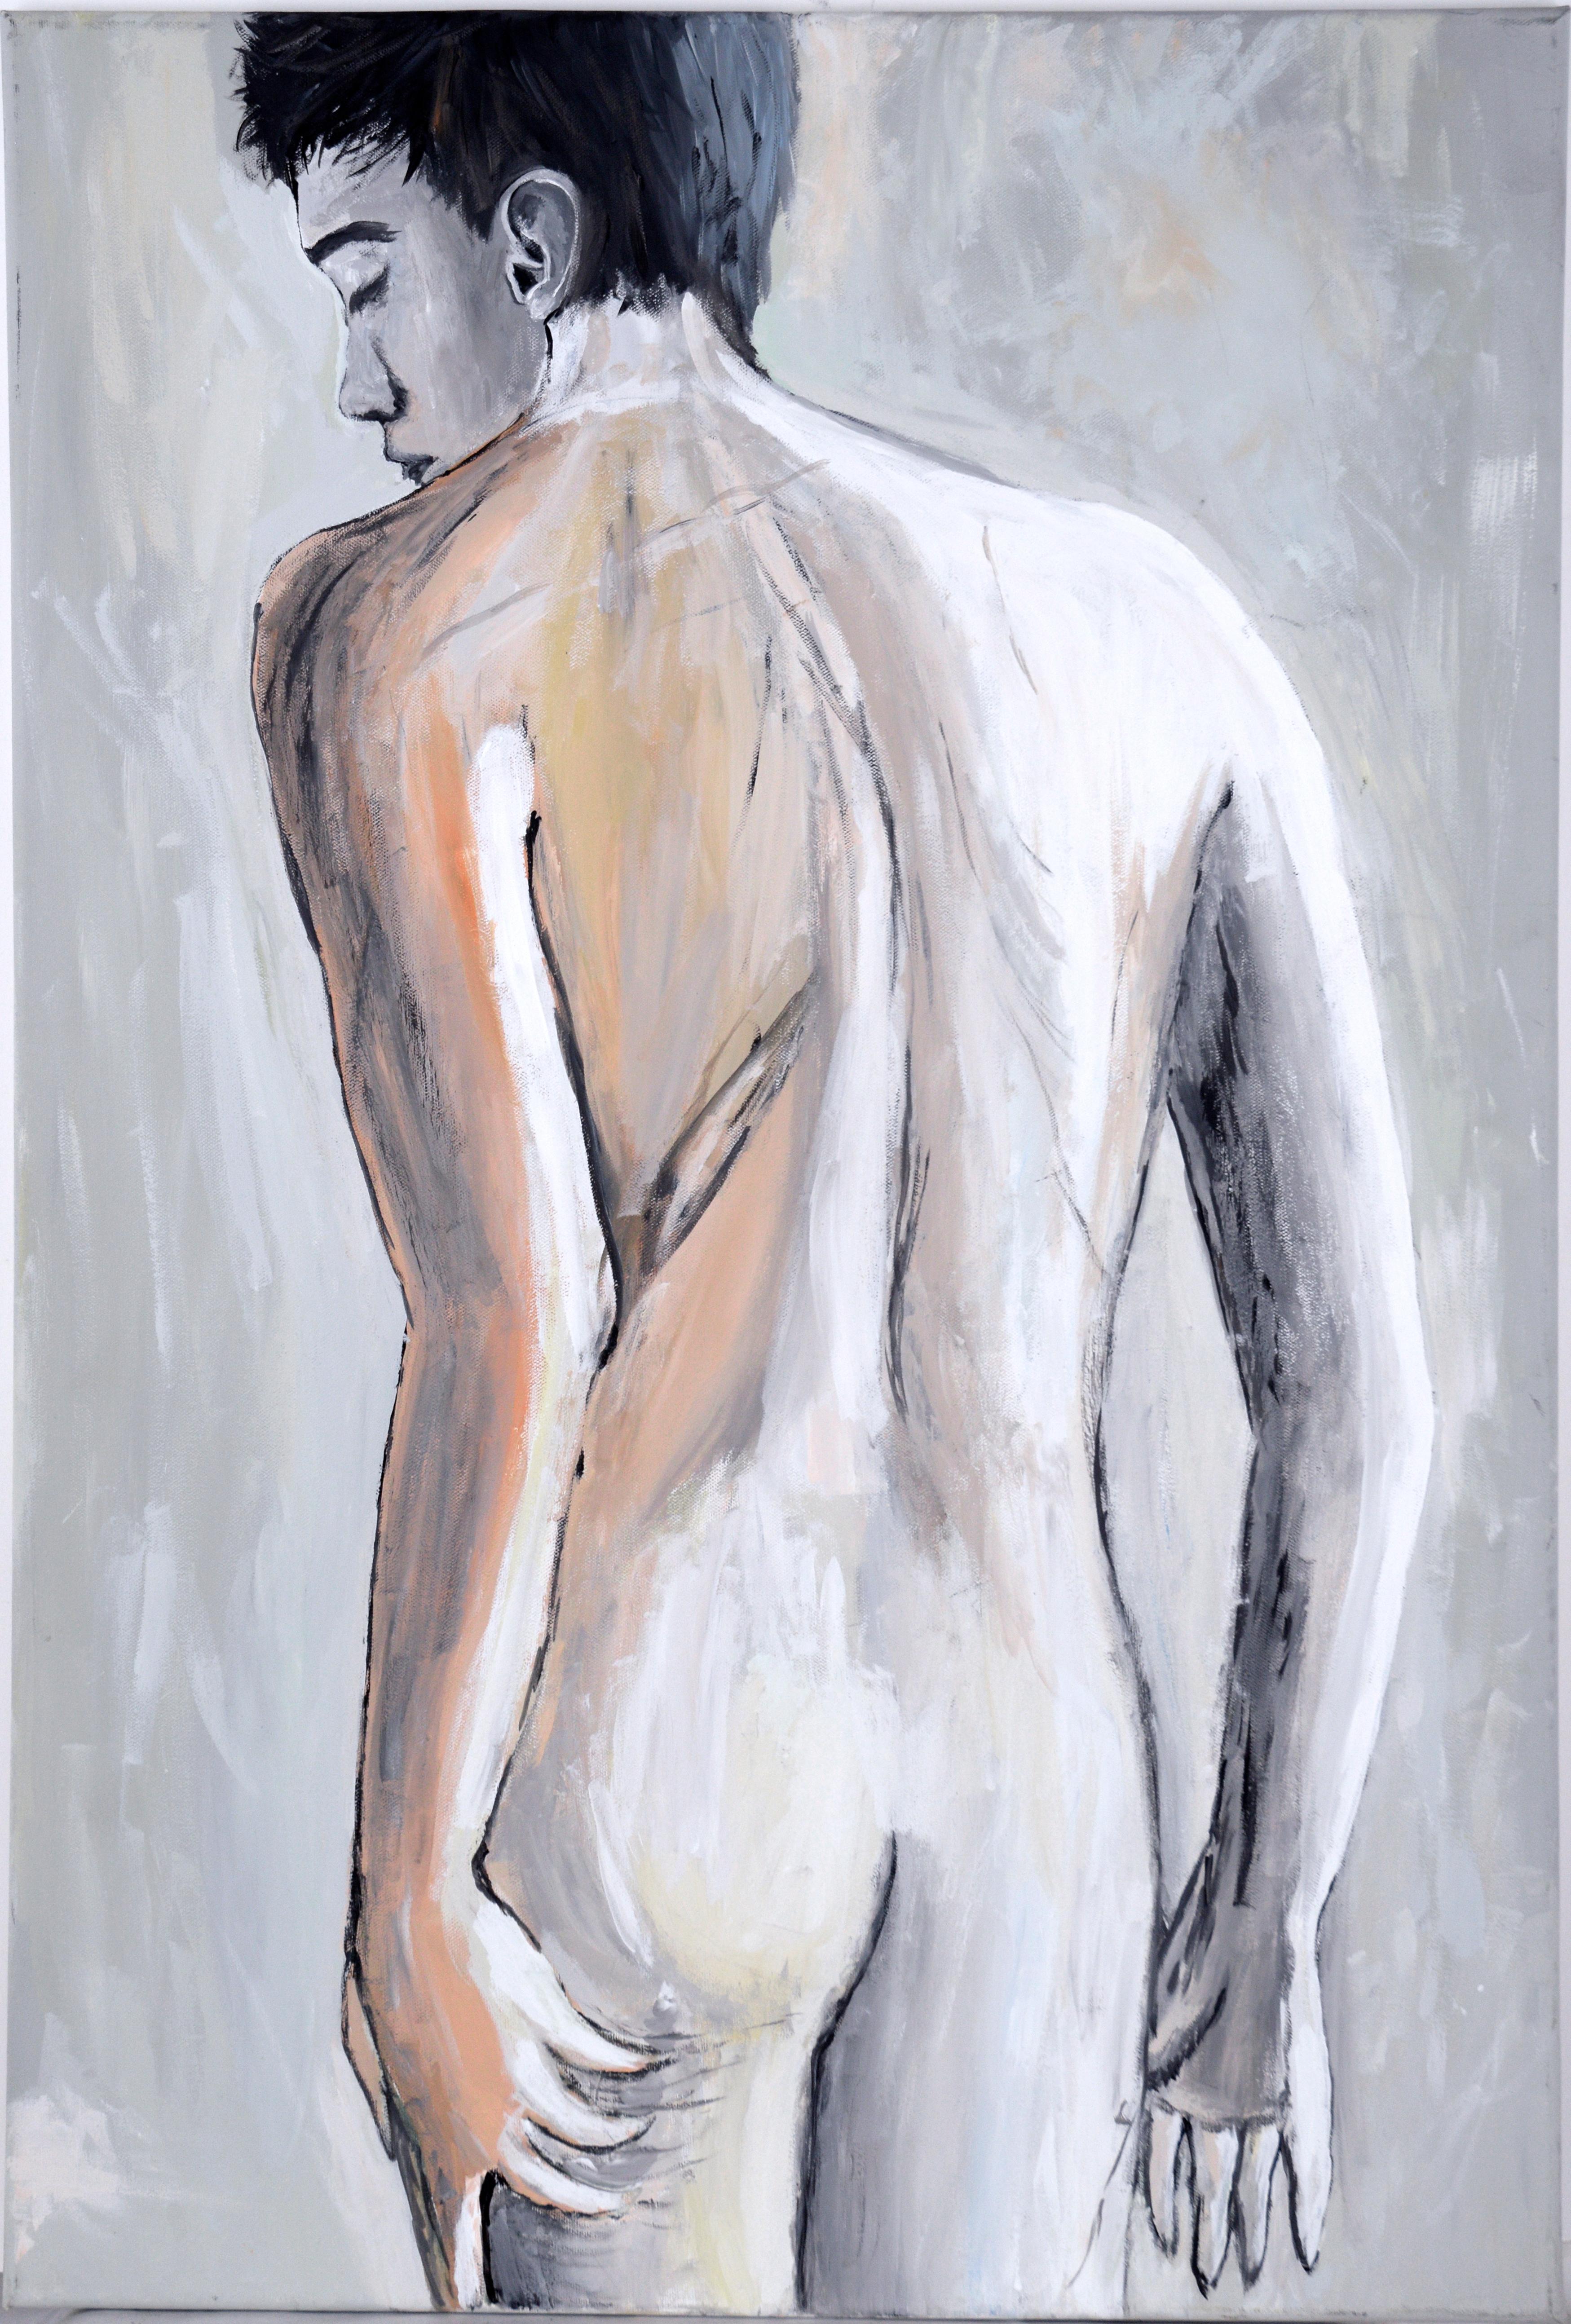 Unknown Nude Painting - Male Nude Figurative Composition - Original Oil Painting on Canvas